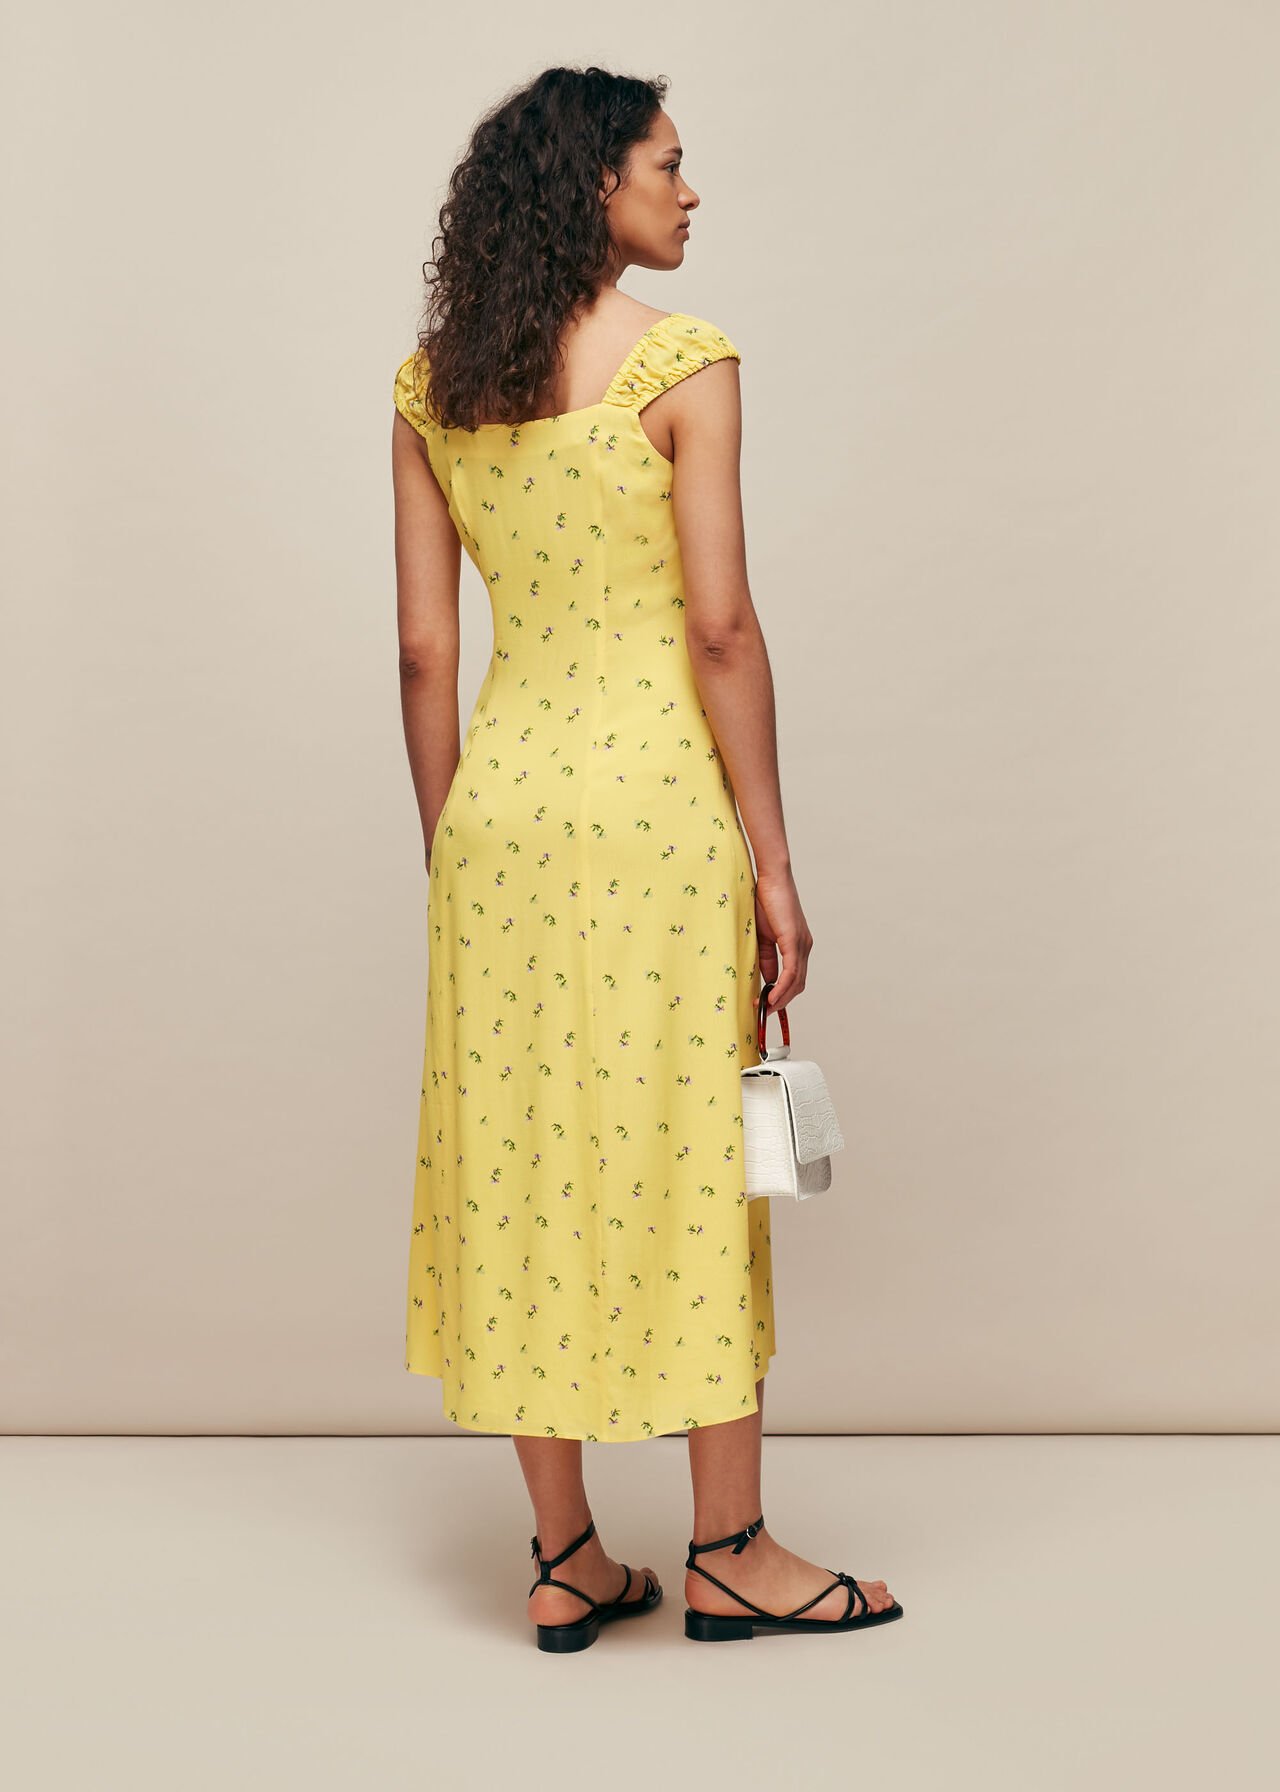 Forget Me Not Print Dress Yellow/Multi